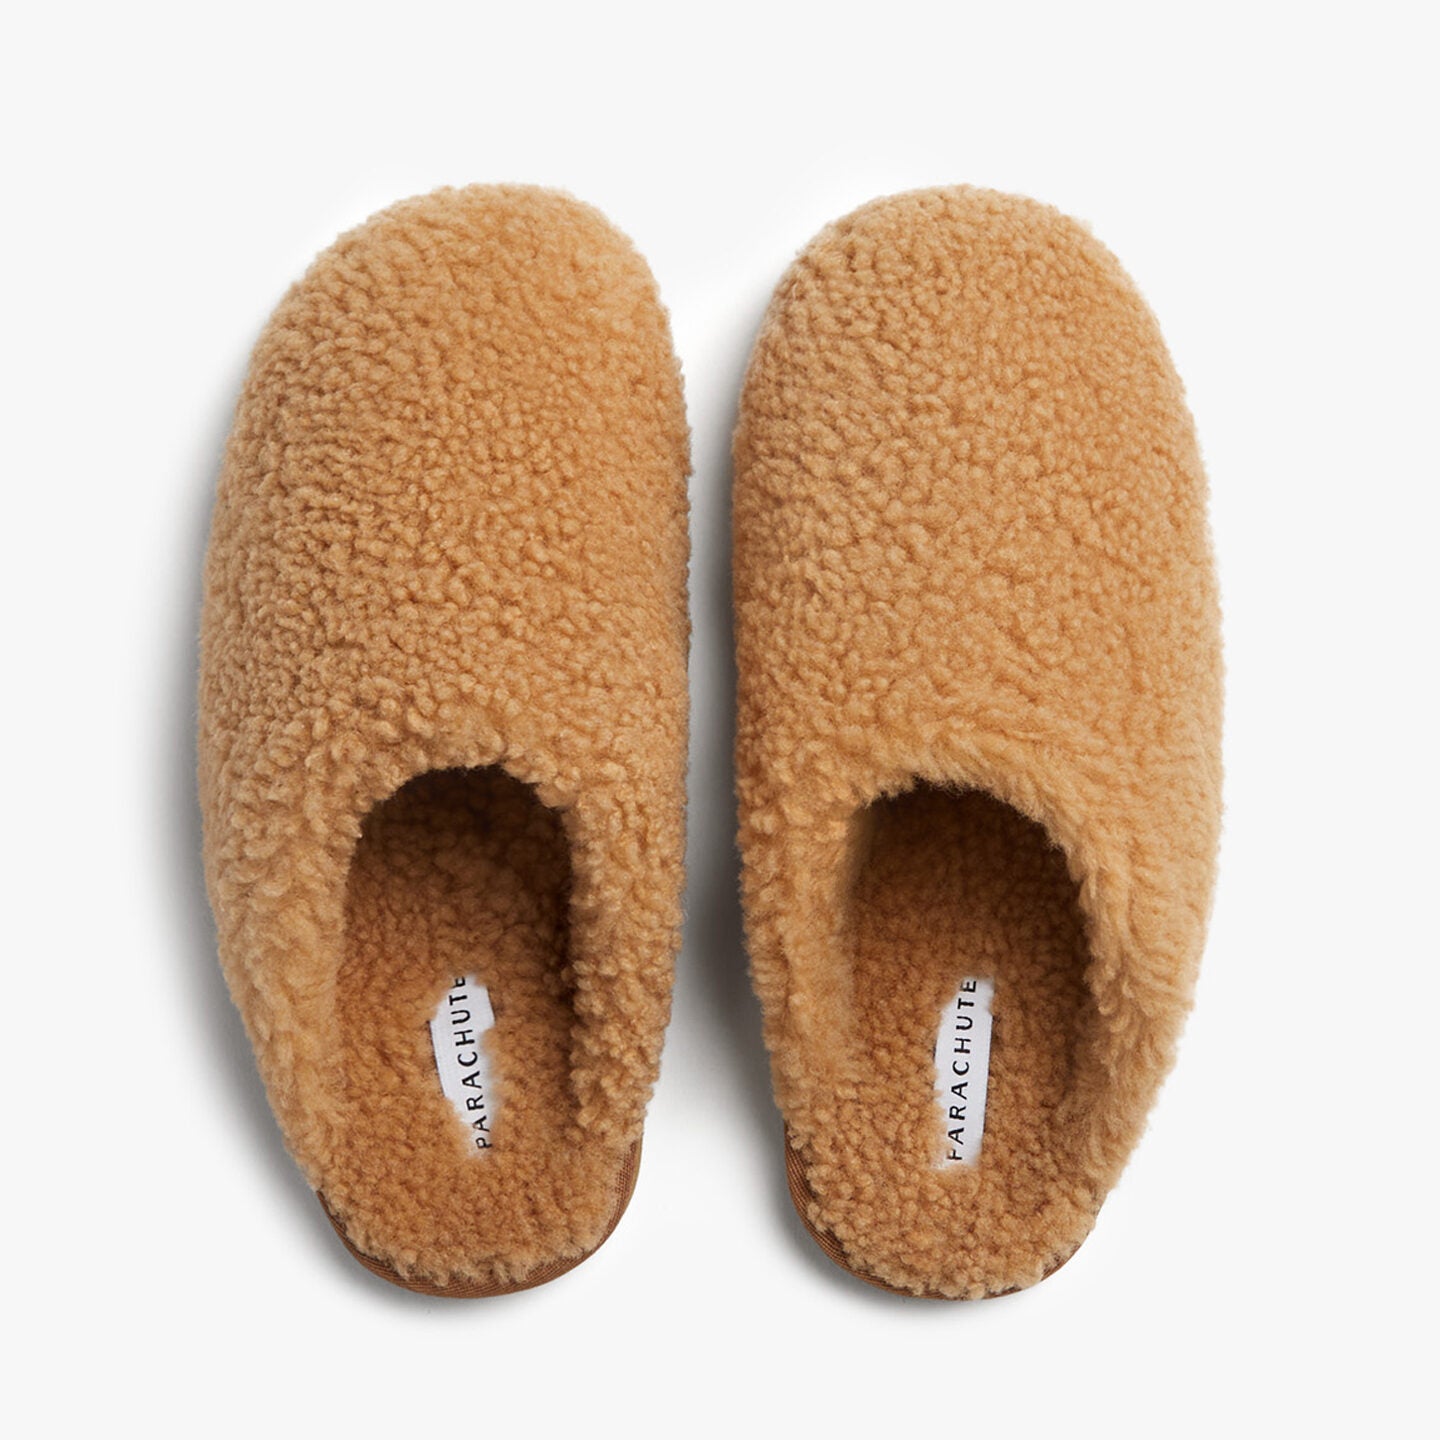 Light brown fluffy wool clogs against a white background.